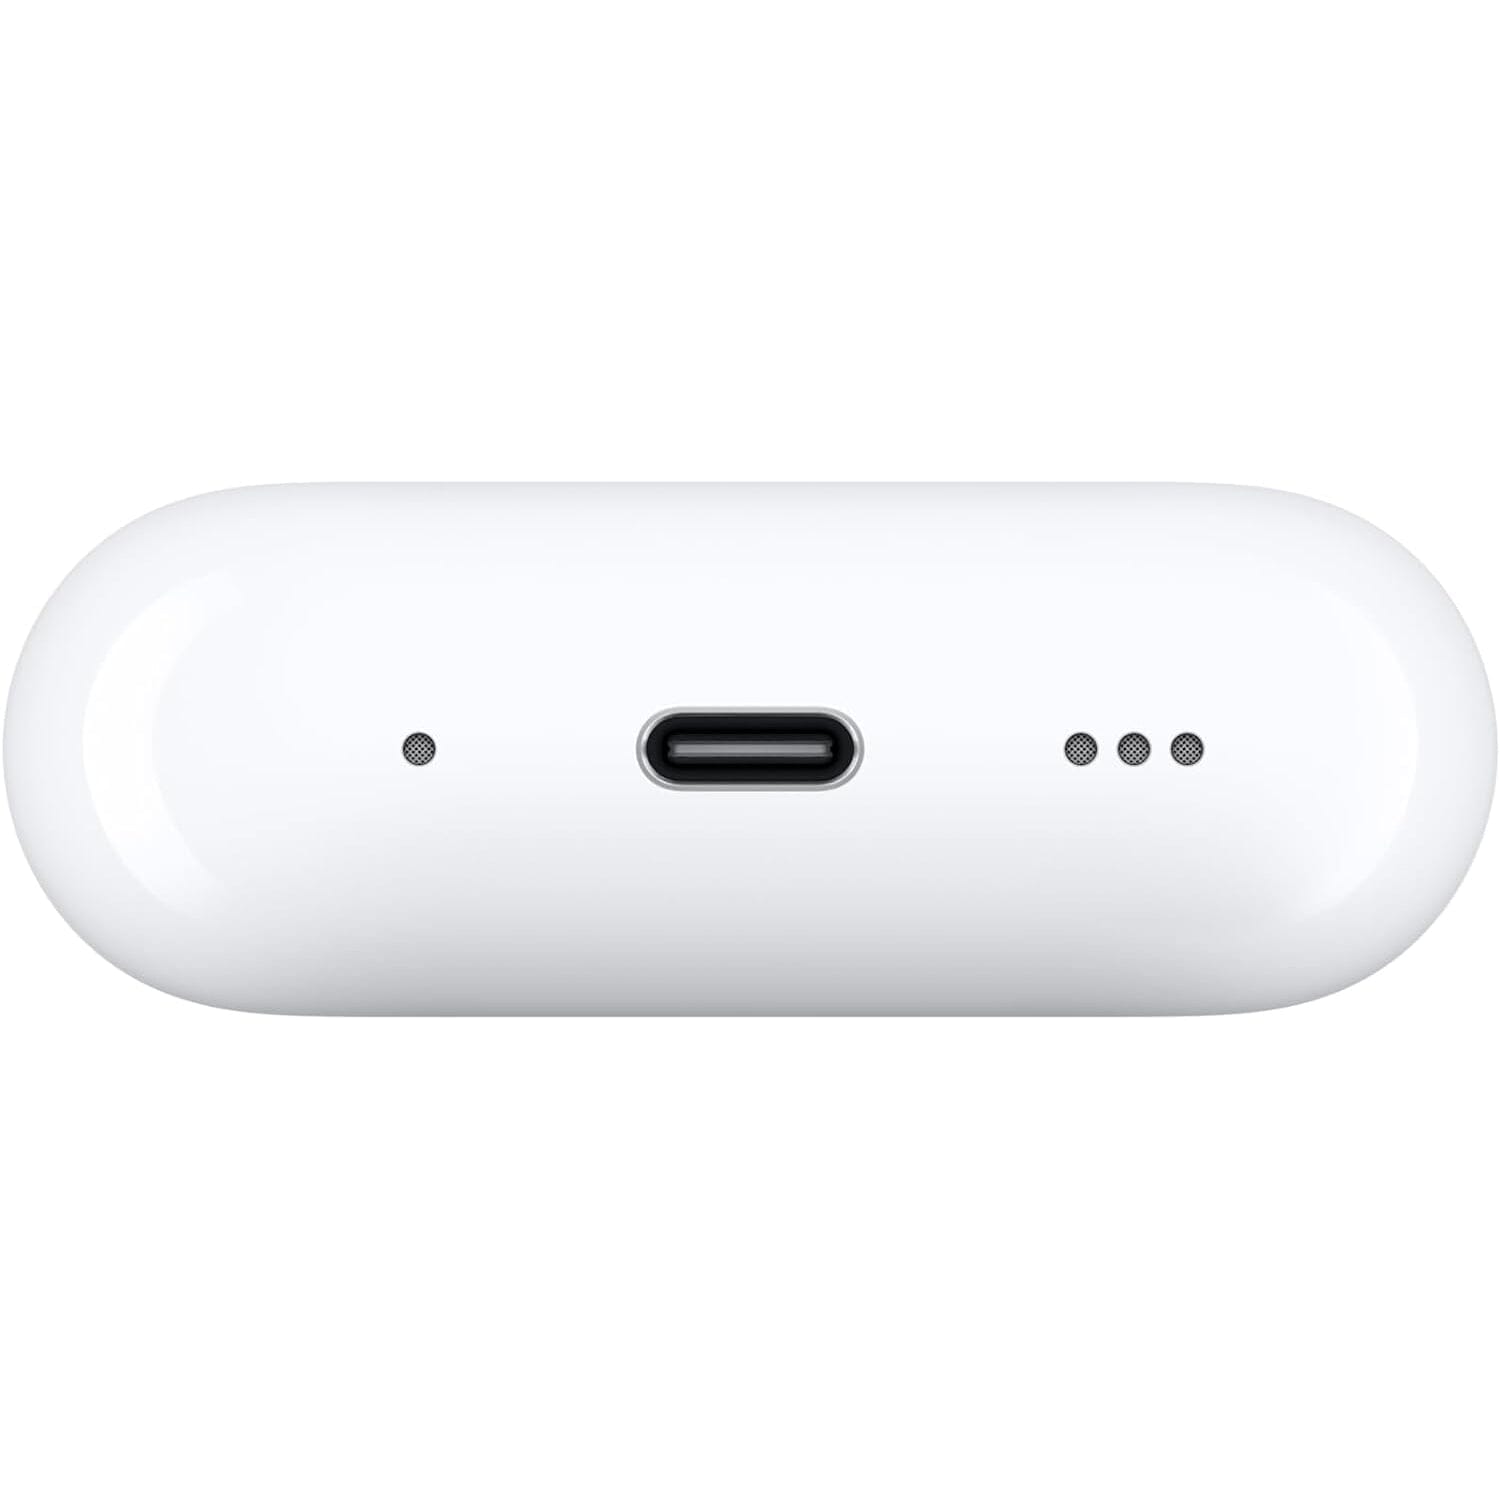 Apple AirPods Pro (2nd Generation) are 20% off on